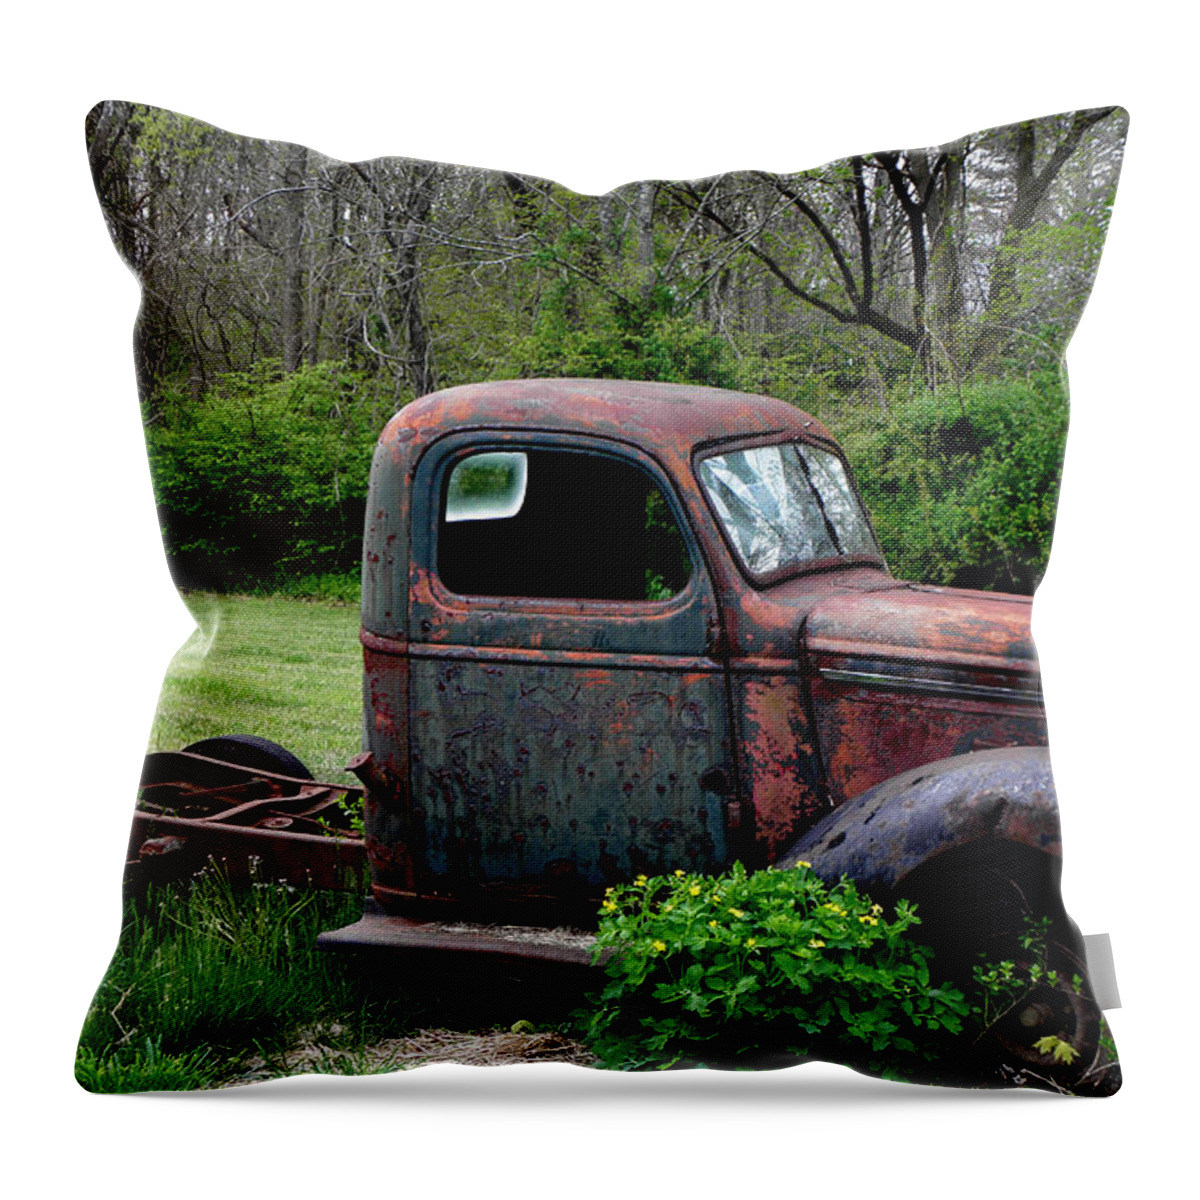 Vintage America Throw Pillow featuring the photograph Lawn Ornament by Kim Galluzzo